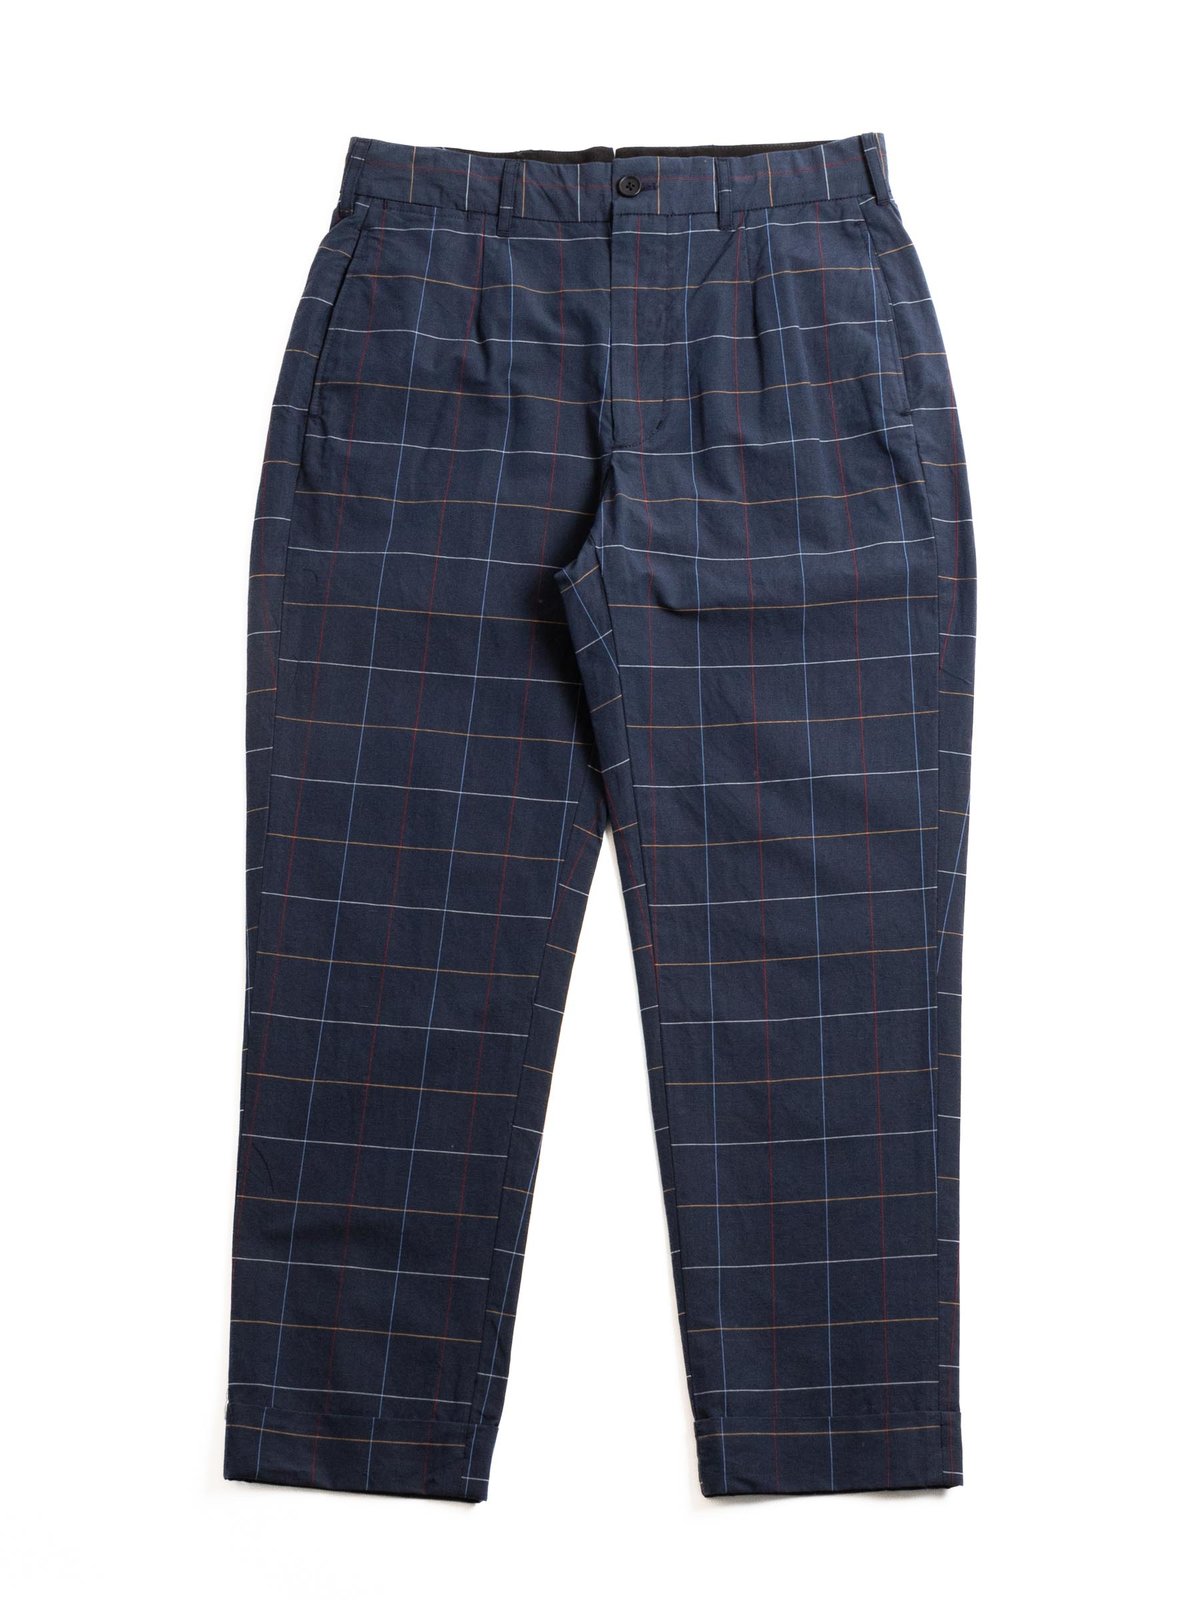 ANDOVER PANT NAVY CL WINDOWPANE - Image 1